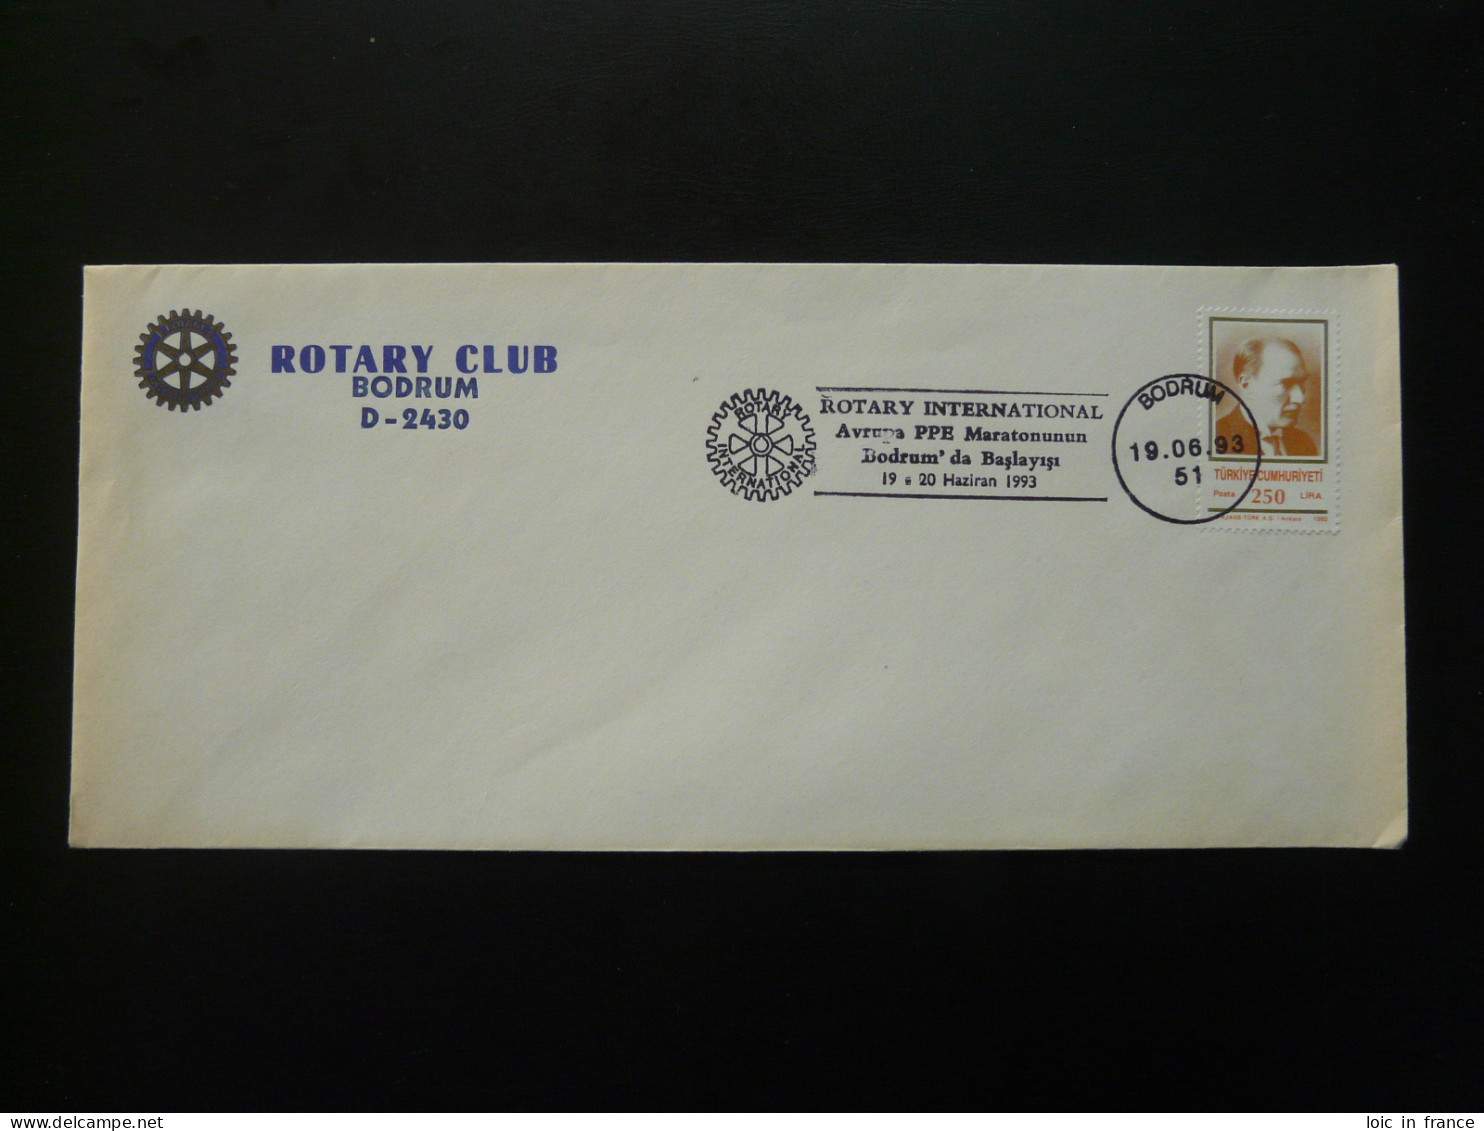  Lettre Cover Rotary Club Flamme Postmark Bodrum Turquie Turkey 1993  - Covers & Documents